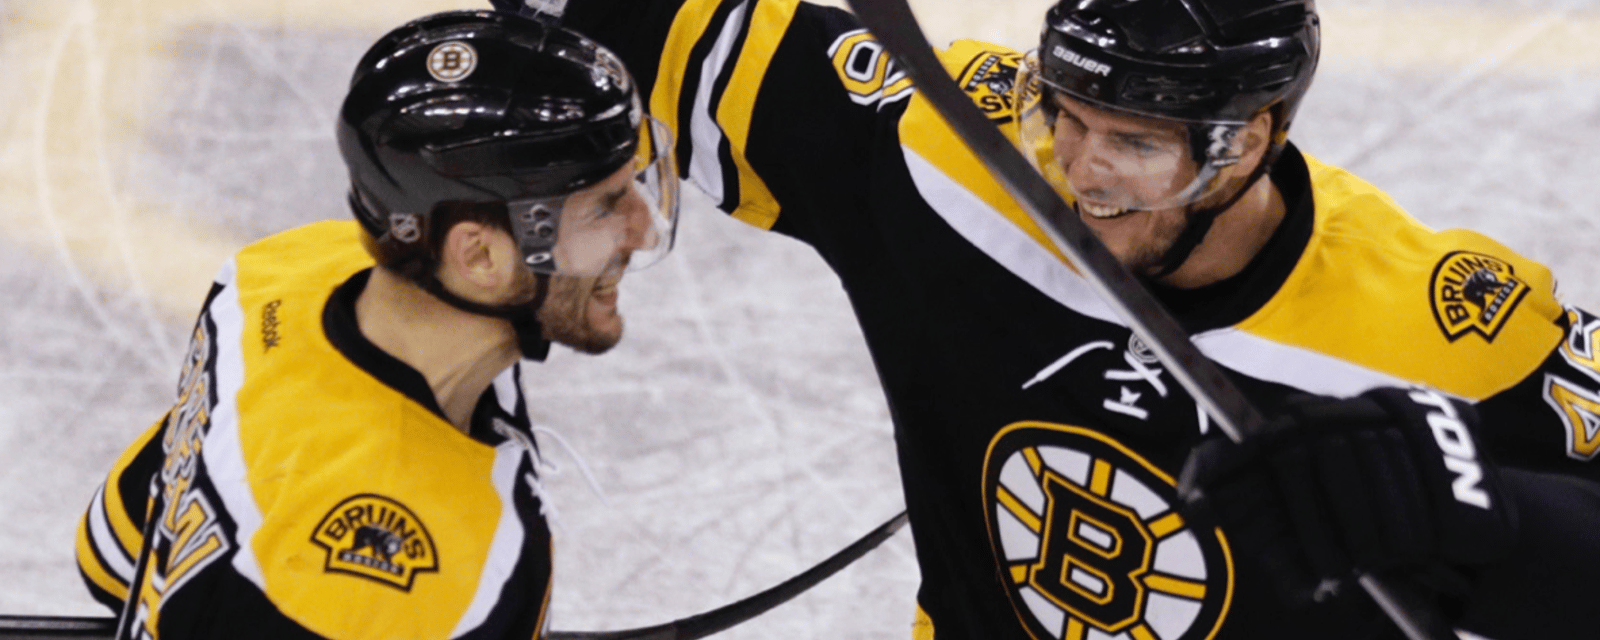 Bruins will face penalty for breaking the rules